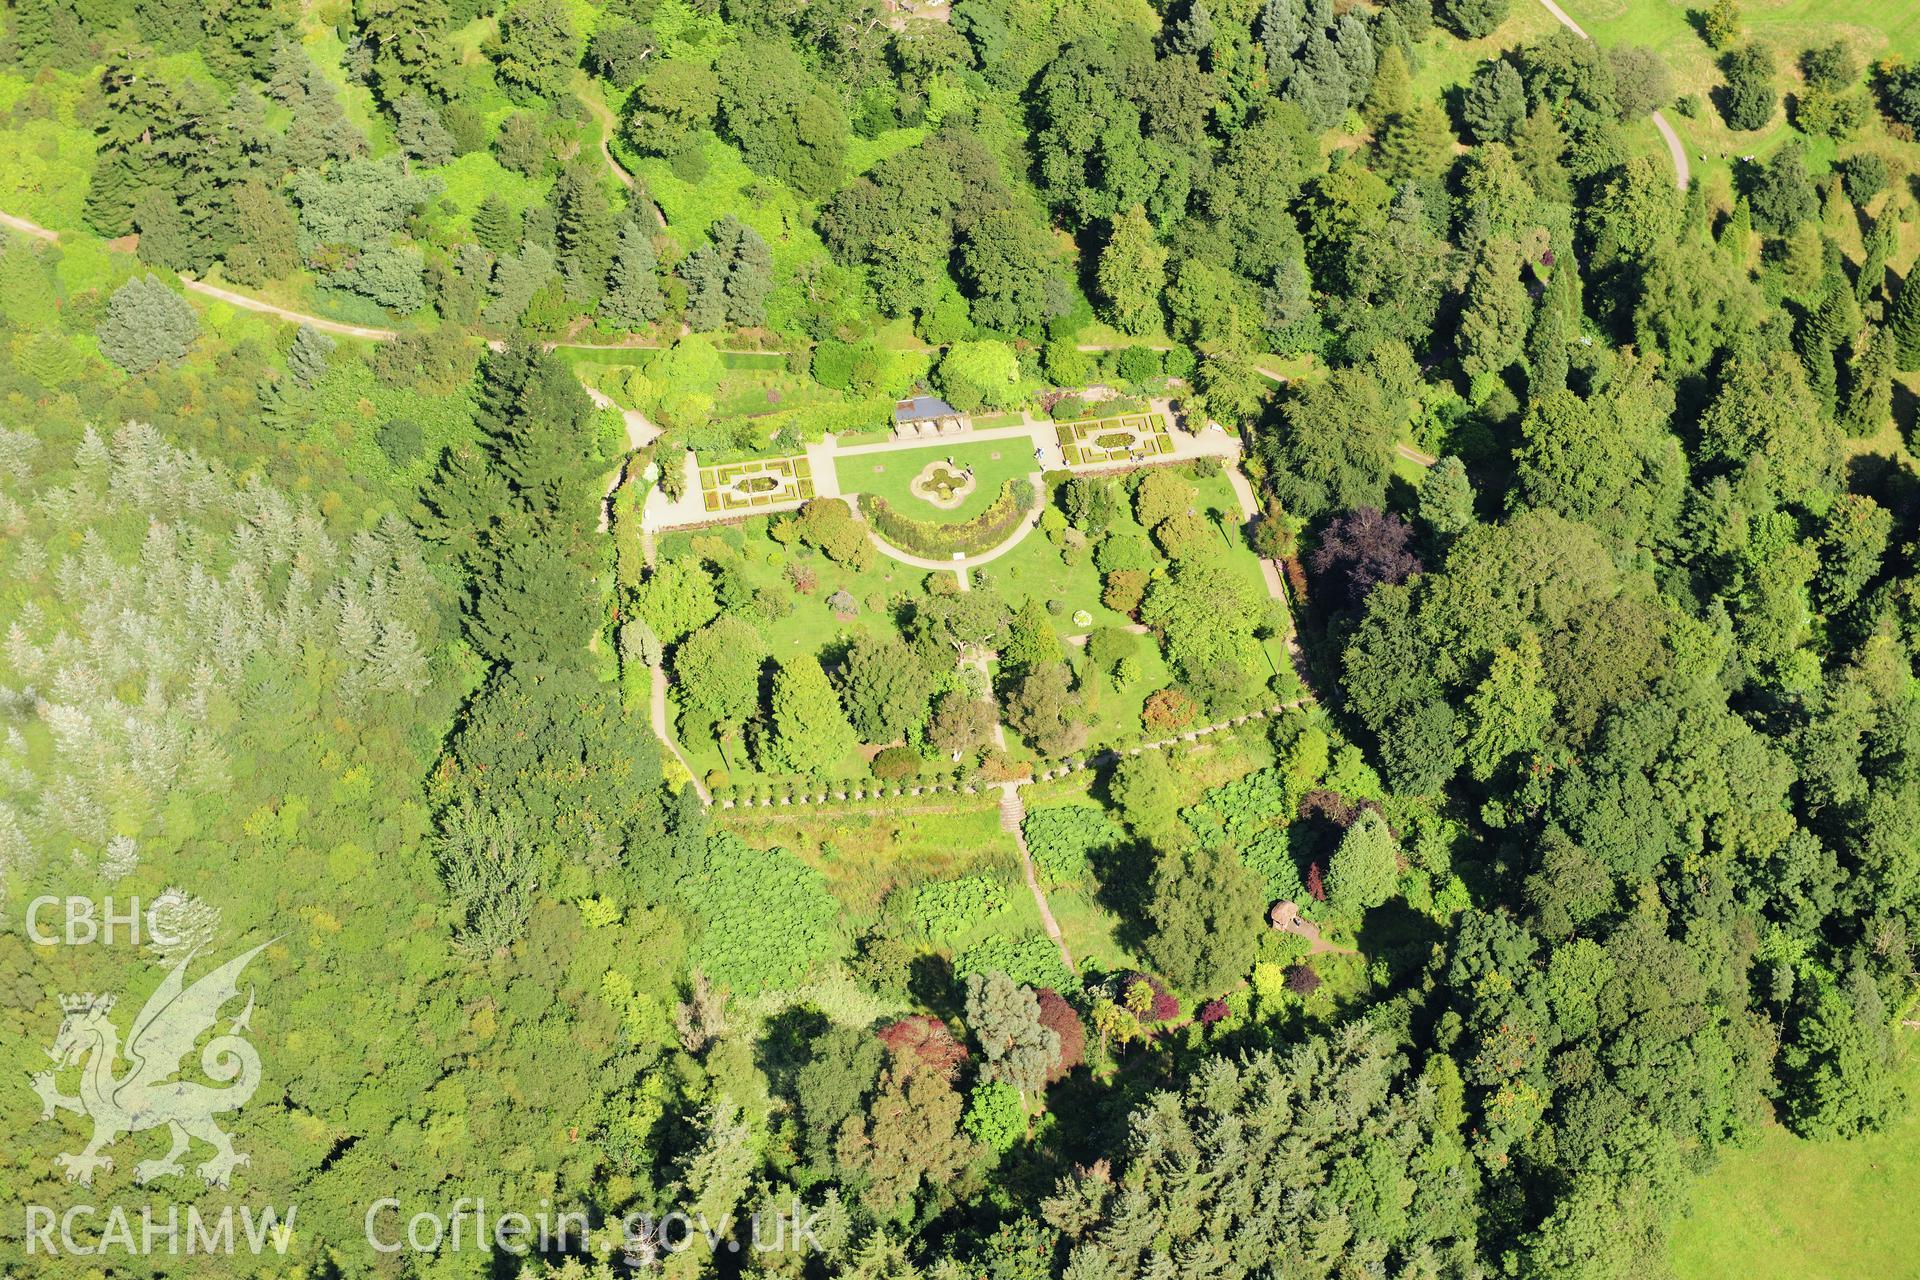 RCAHMW colour oblique photograph of Penrhyn Castle garden and walled flower garden, viewed from the north-east. Taken by Toby Driver on 10/08/2012.